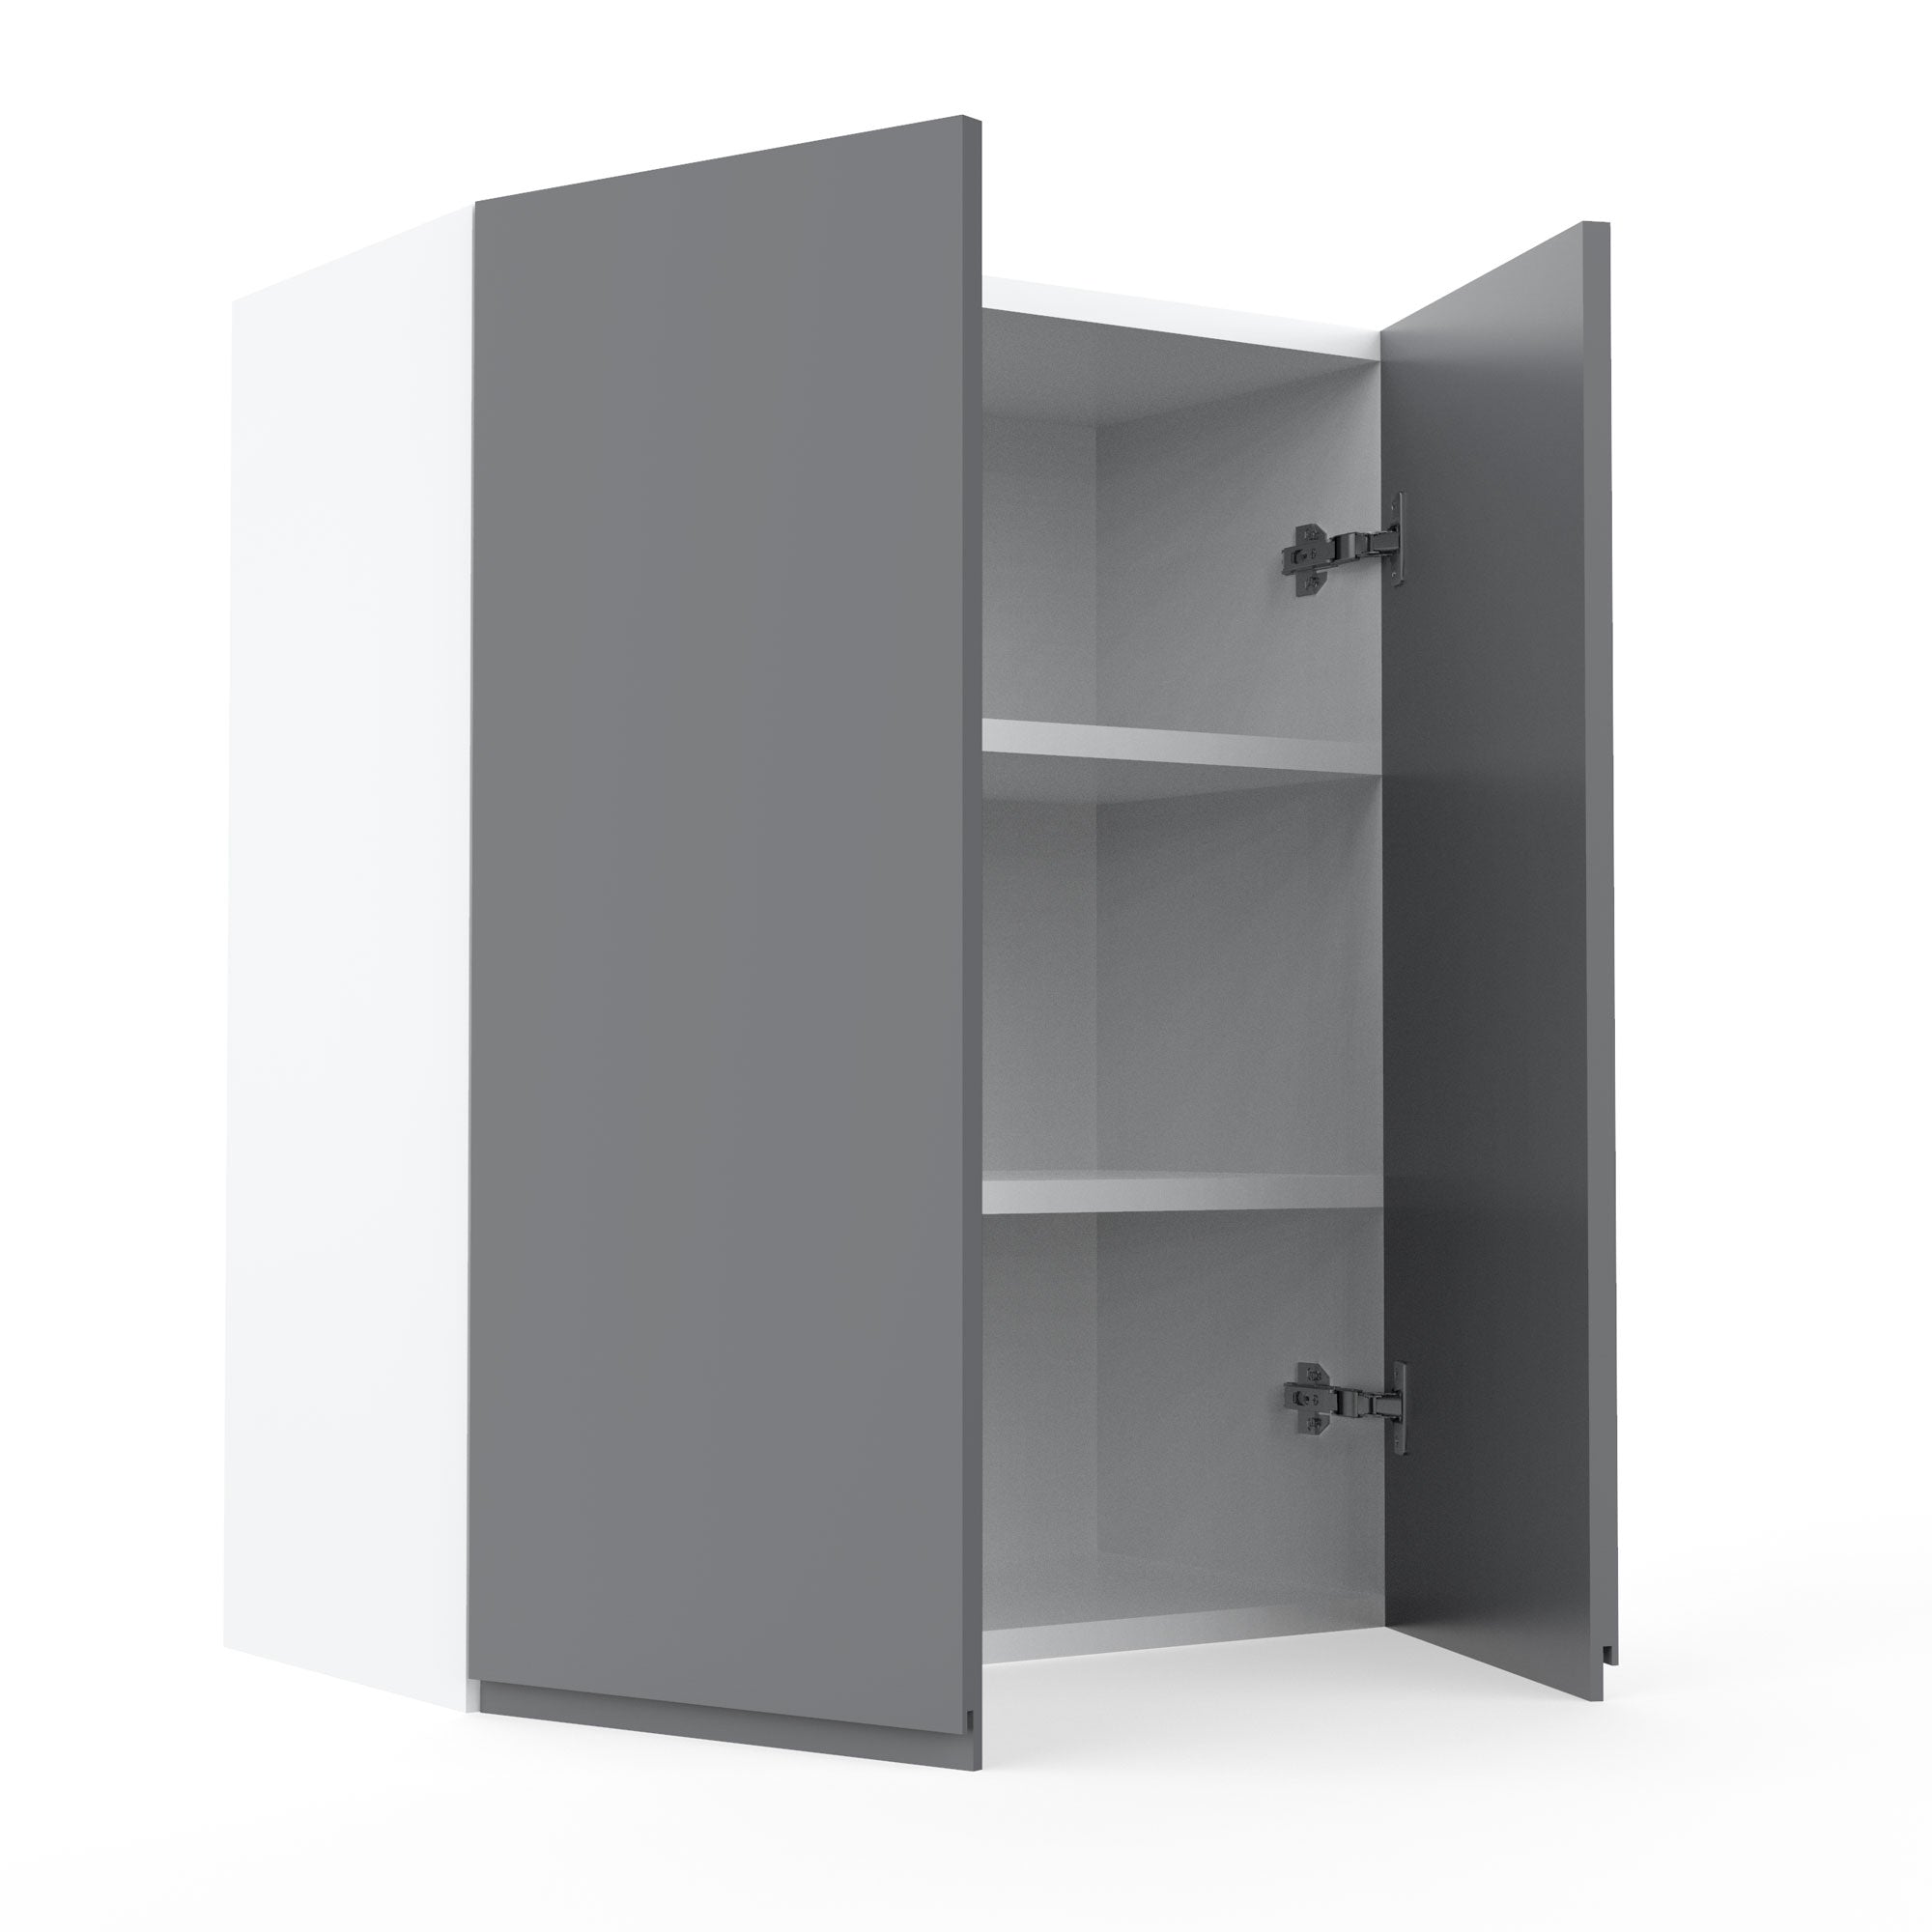 RTA - Glossy Grey - Double Door Wall Cabinets | 24"W x 30"H x 12"D